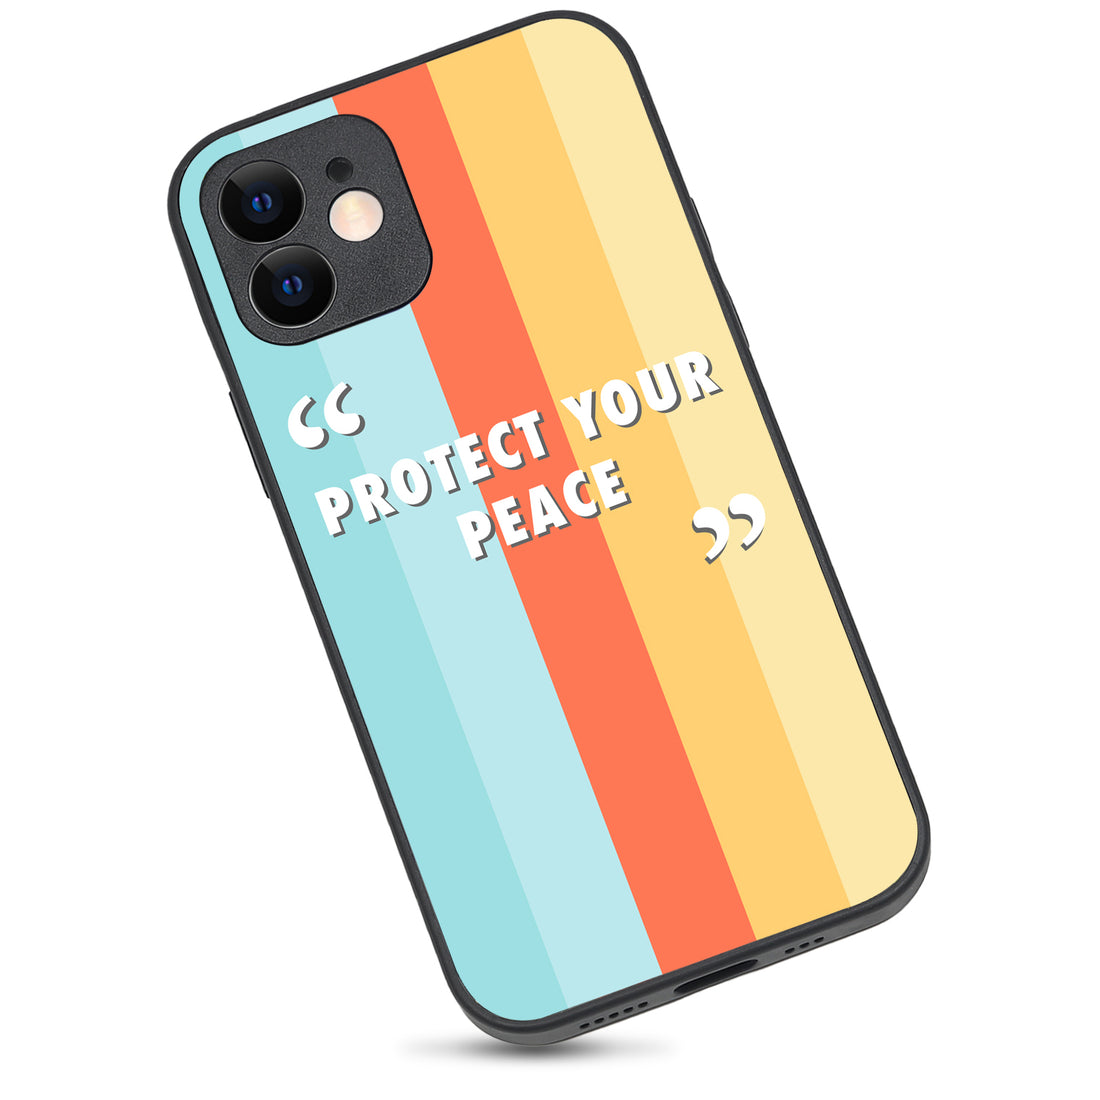 Protect your peace Motivational Quotes iPhone 12 Case